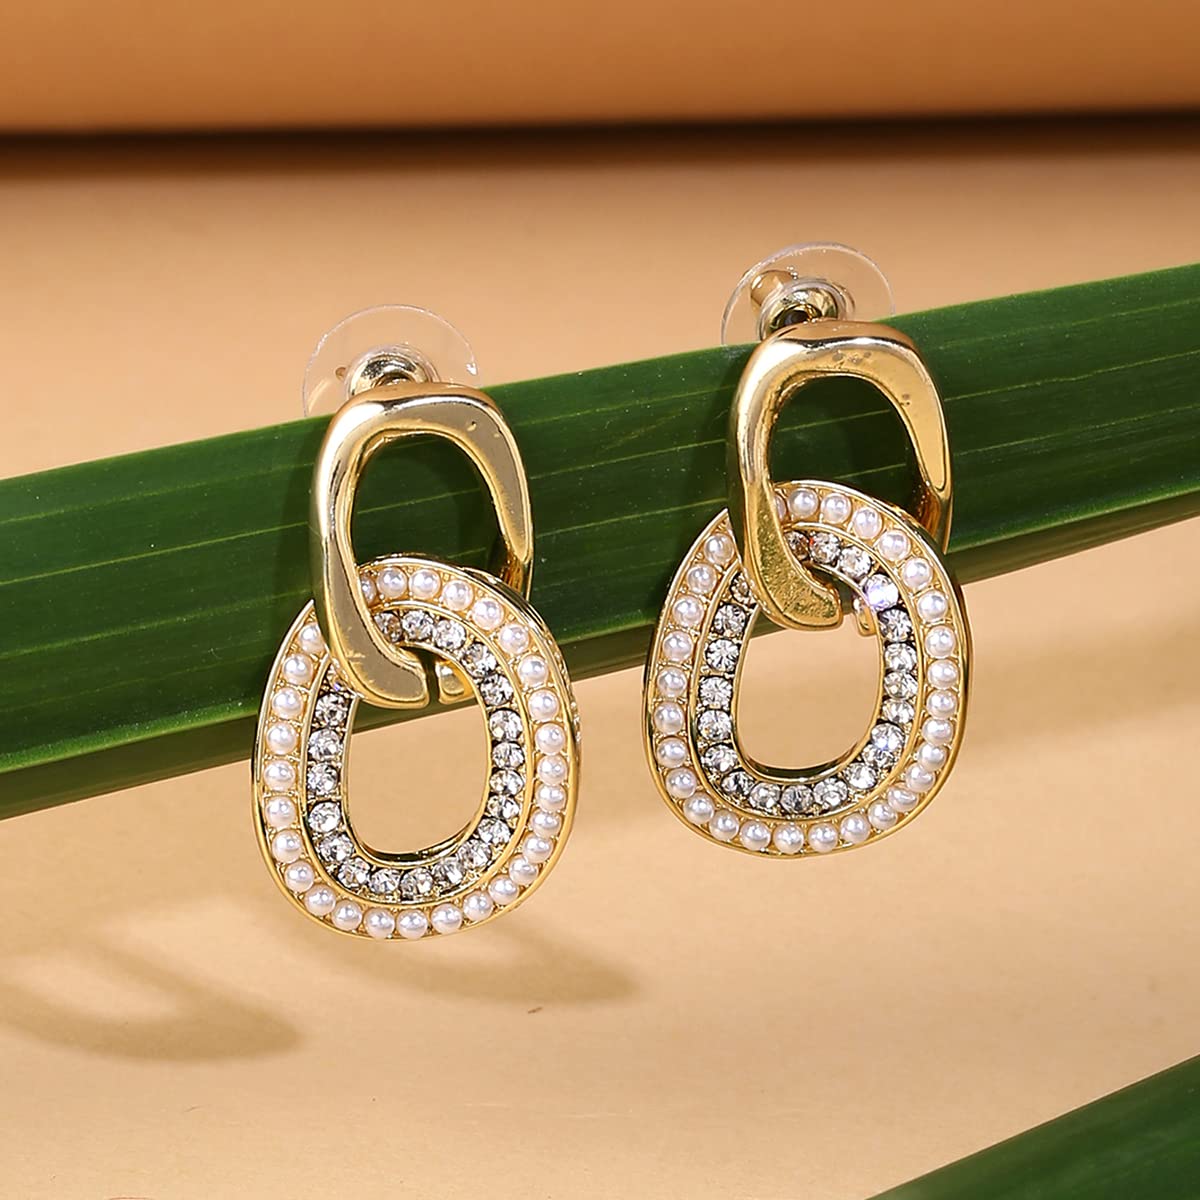 Yellow Chimes Earrings For Women Gold Tone Crystal Studded Connected Geometrical shape Dangling Drop Earrings For Women and Girls